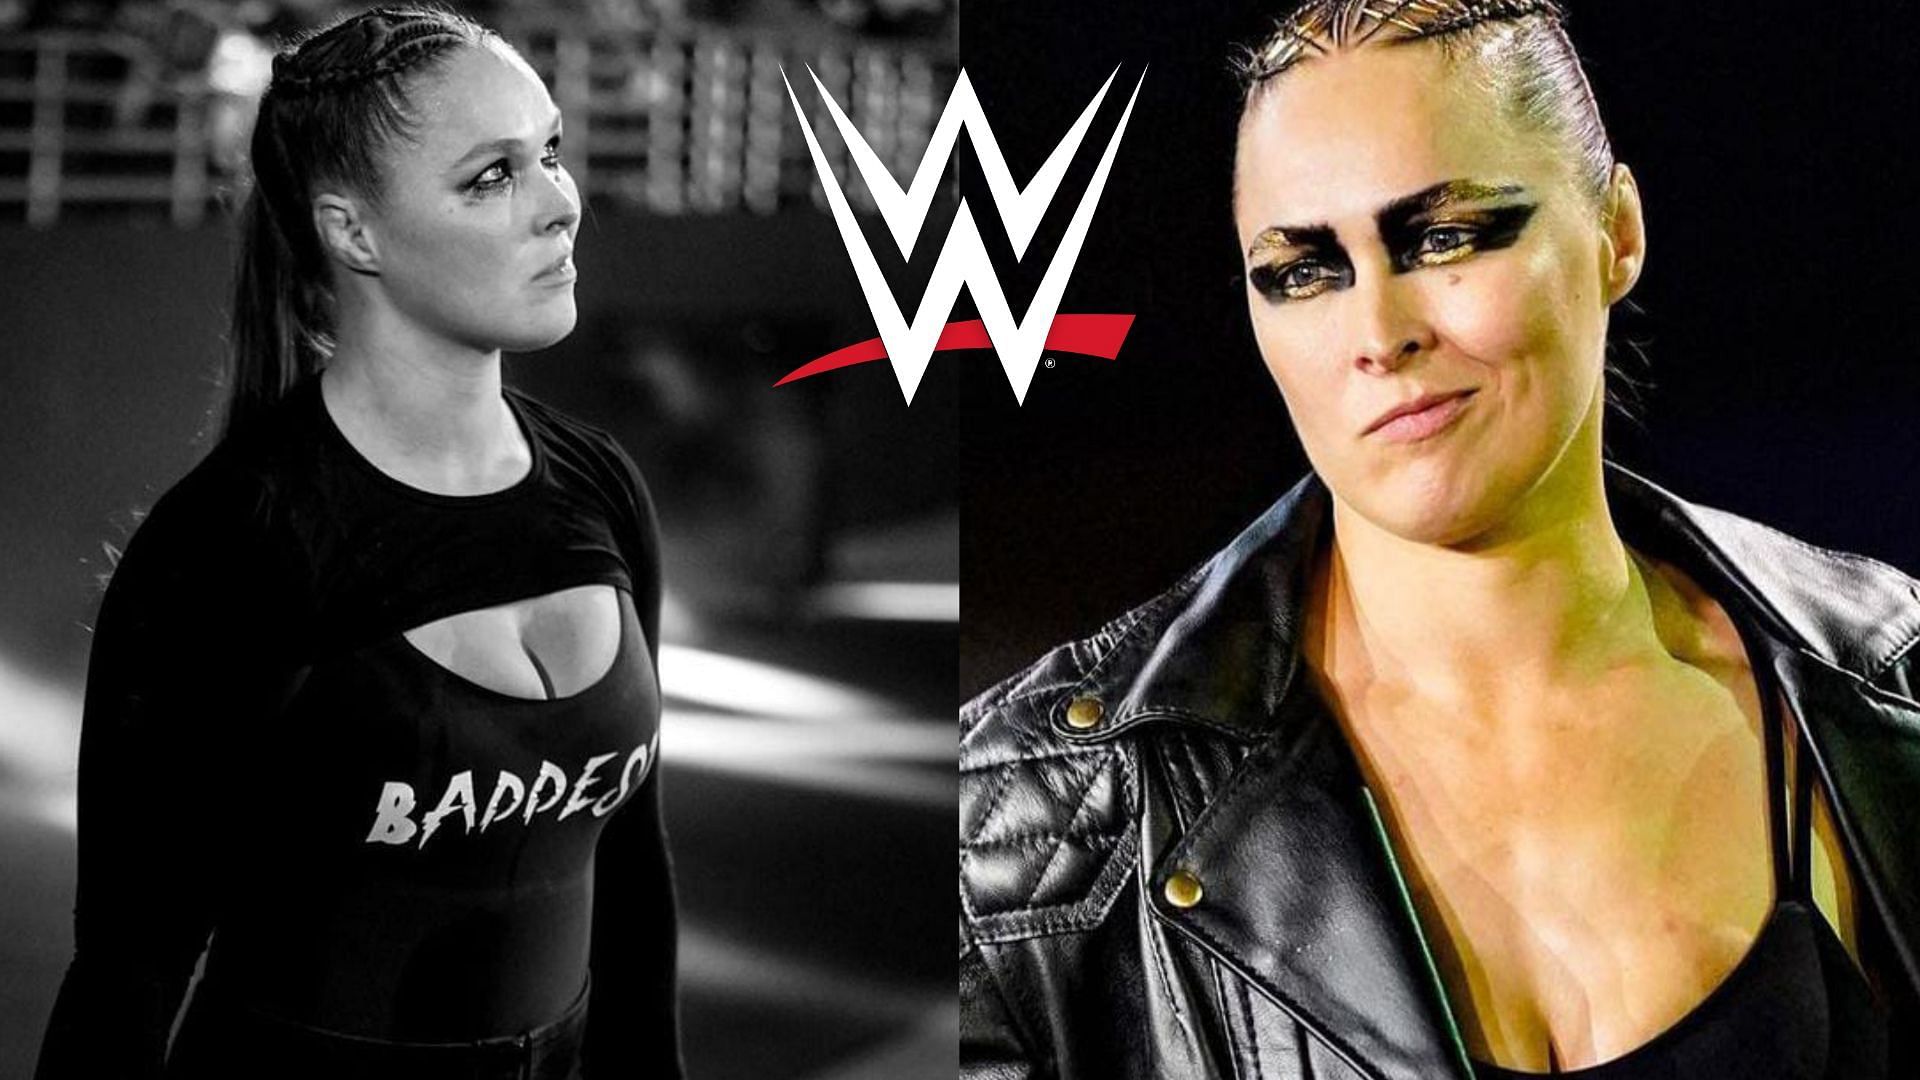 Which WWE legend should manage Ronda Rousey if they return to the company?